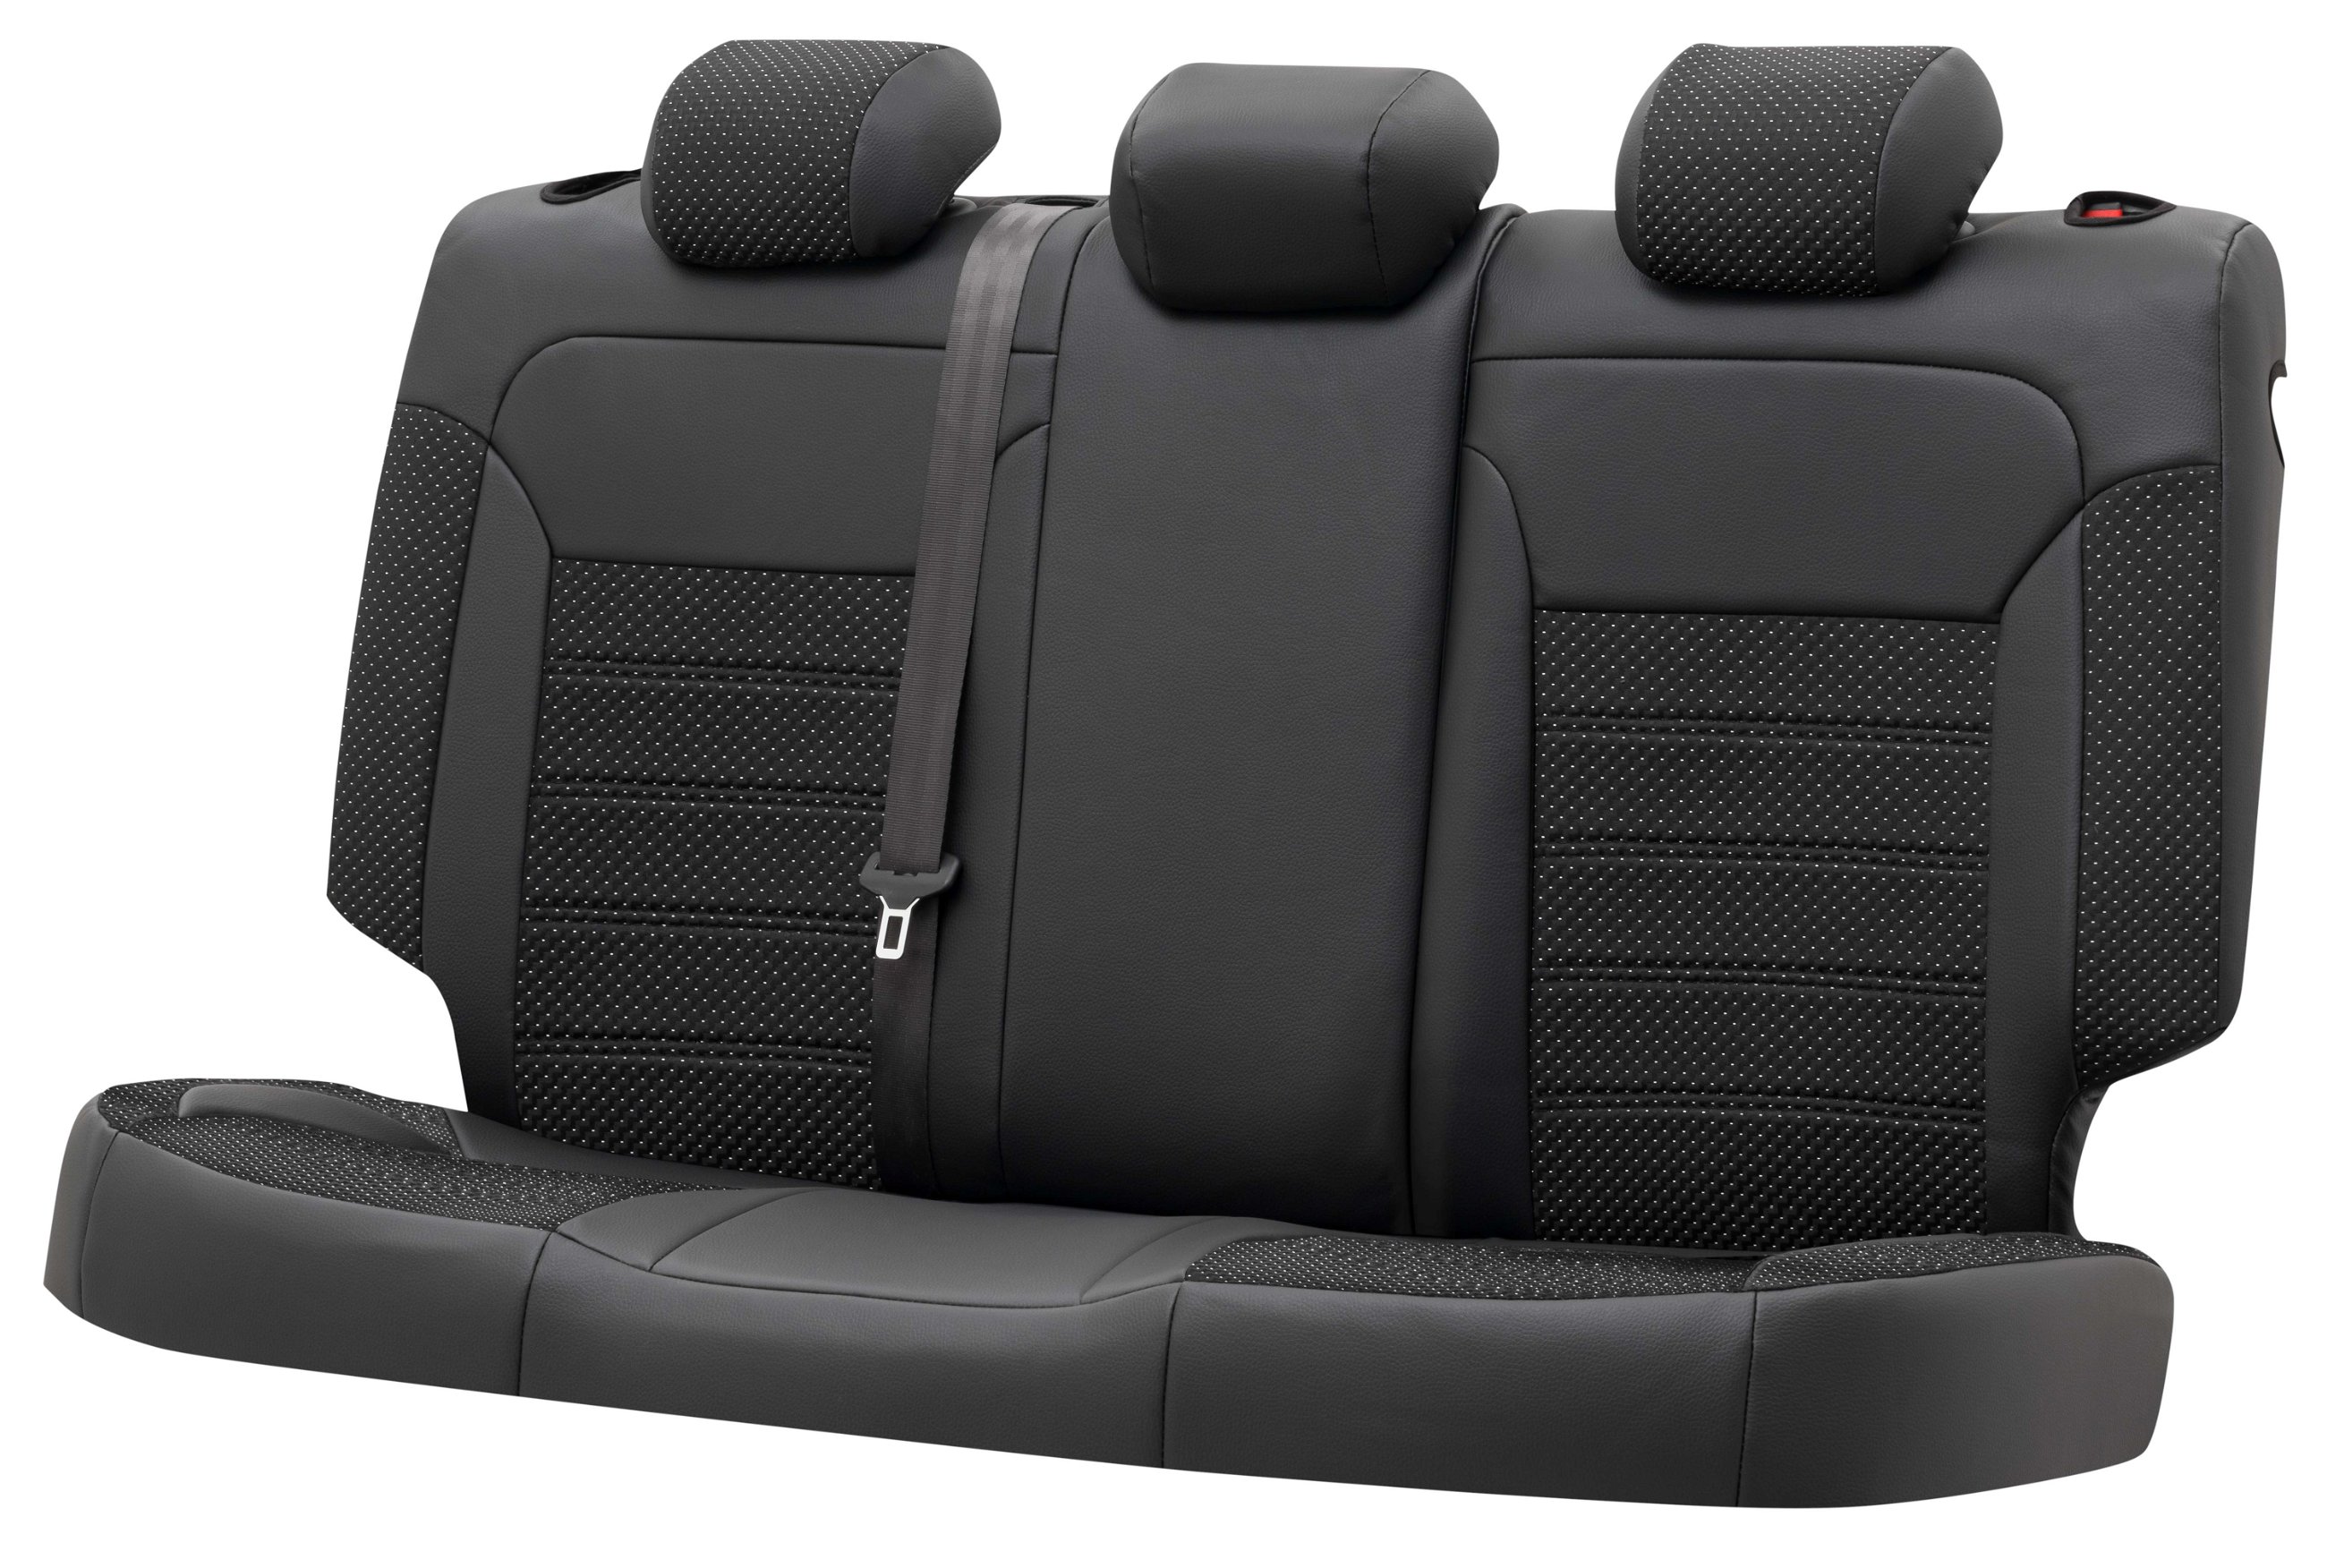 Seat cover Torino for Fiat 500L 2013-Today, 1 rear seat cover for normal seats